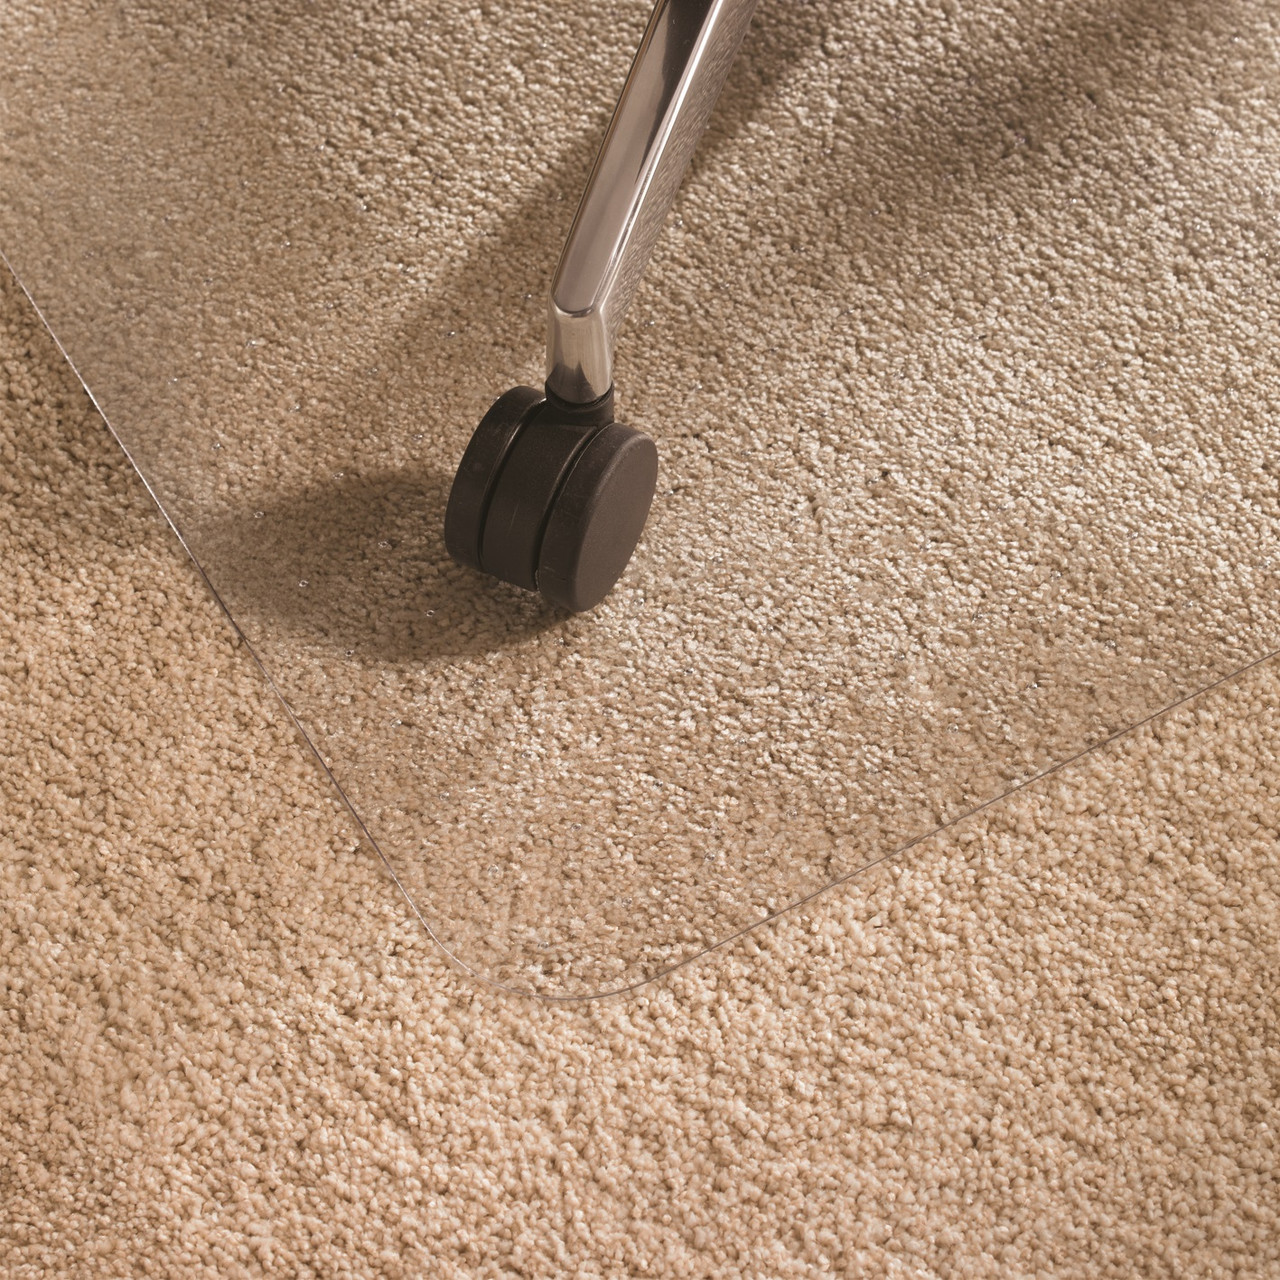 Cleartex Ultimat Chair Mat for Plush Pile Carpets (over 1/2), Clear  Polycarbonate, Lipped Carpet Protector